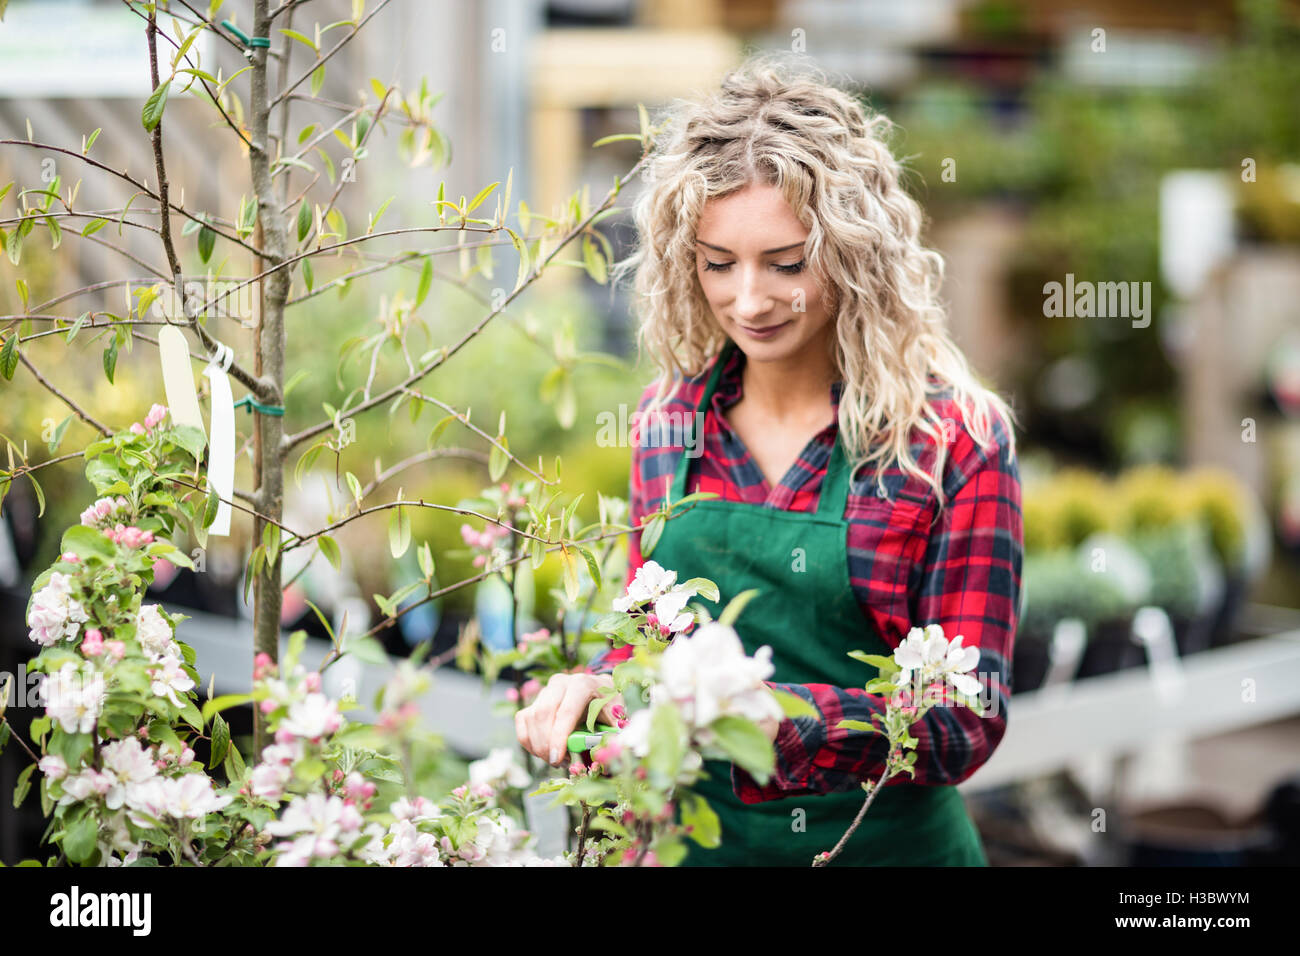 Female florist pruning a stem of flower with pruning shears Stock Photo